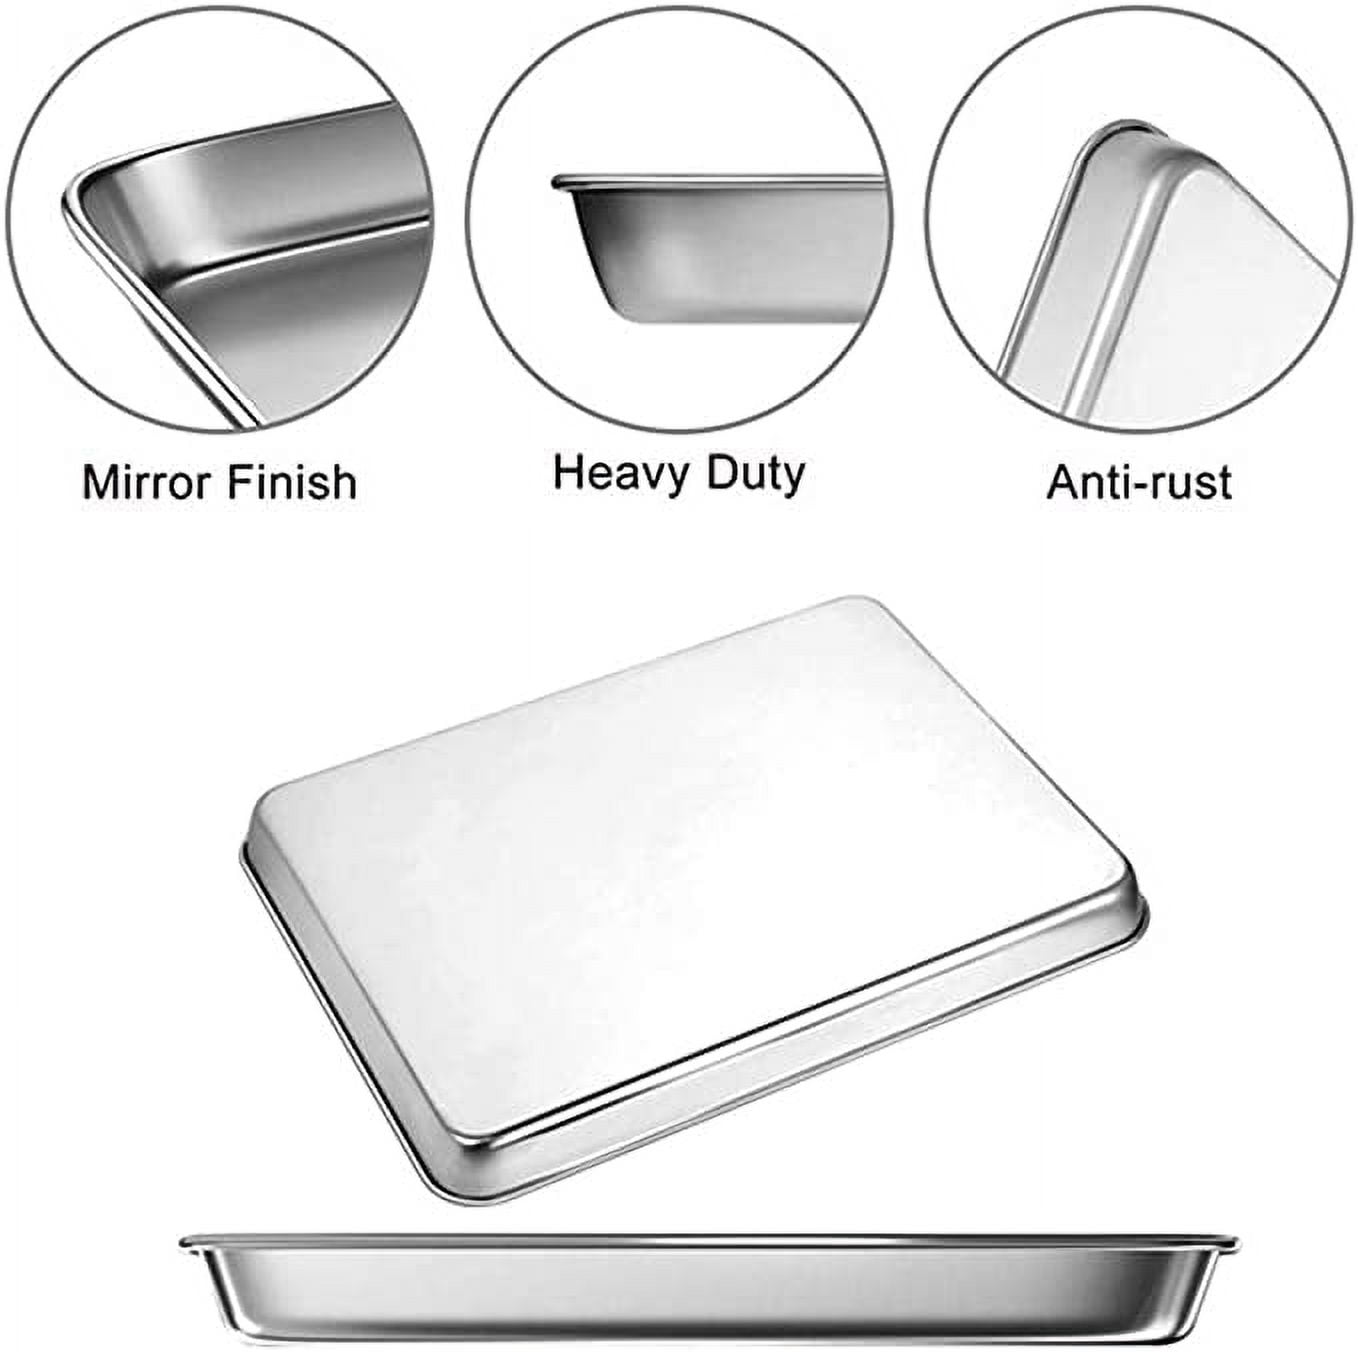 Waring Commercial Baking Sheet, 1/2 size, stainless steel